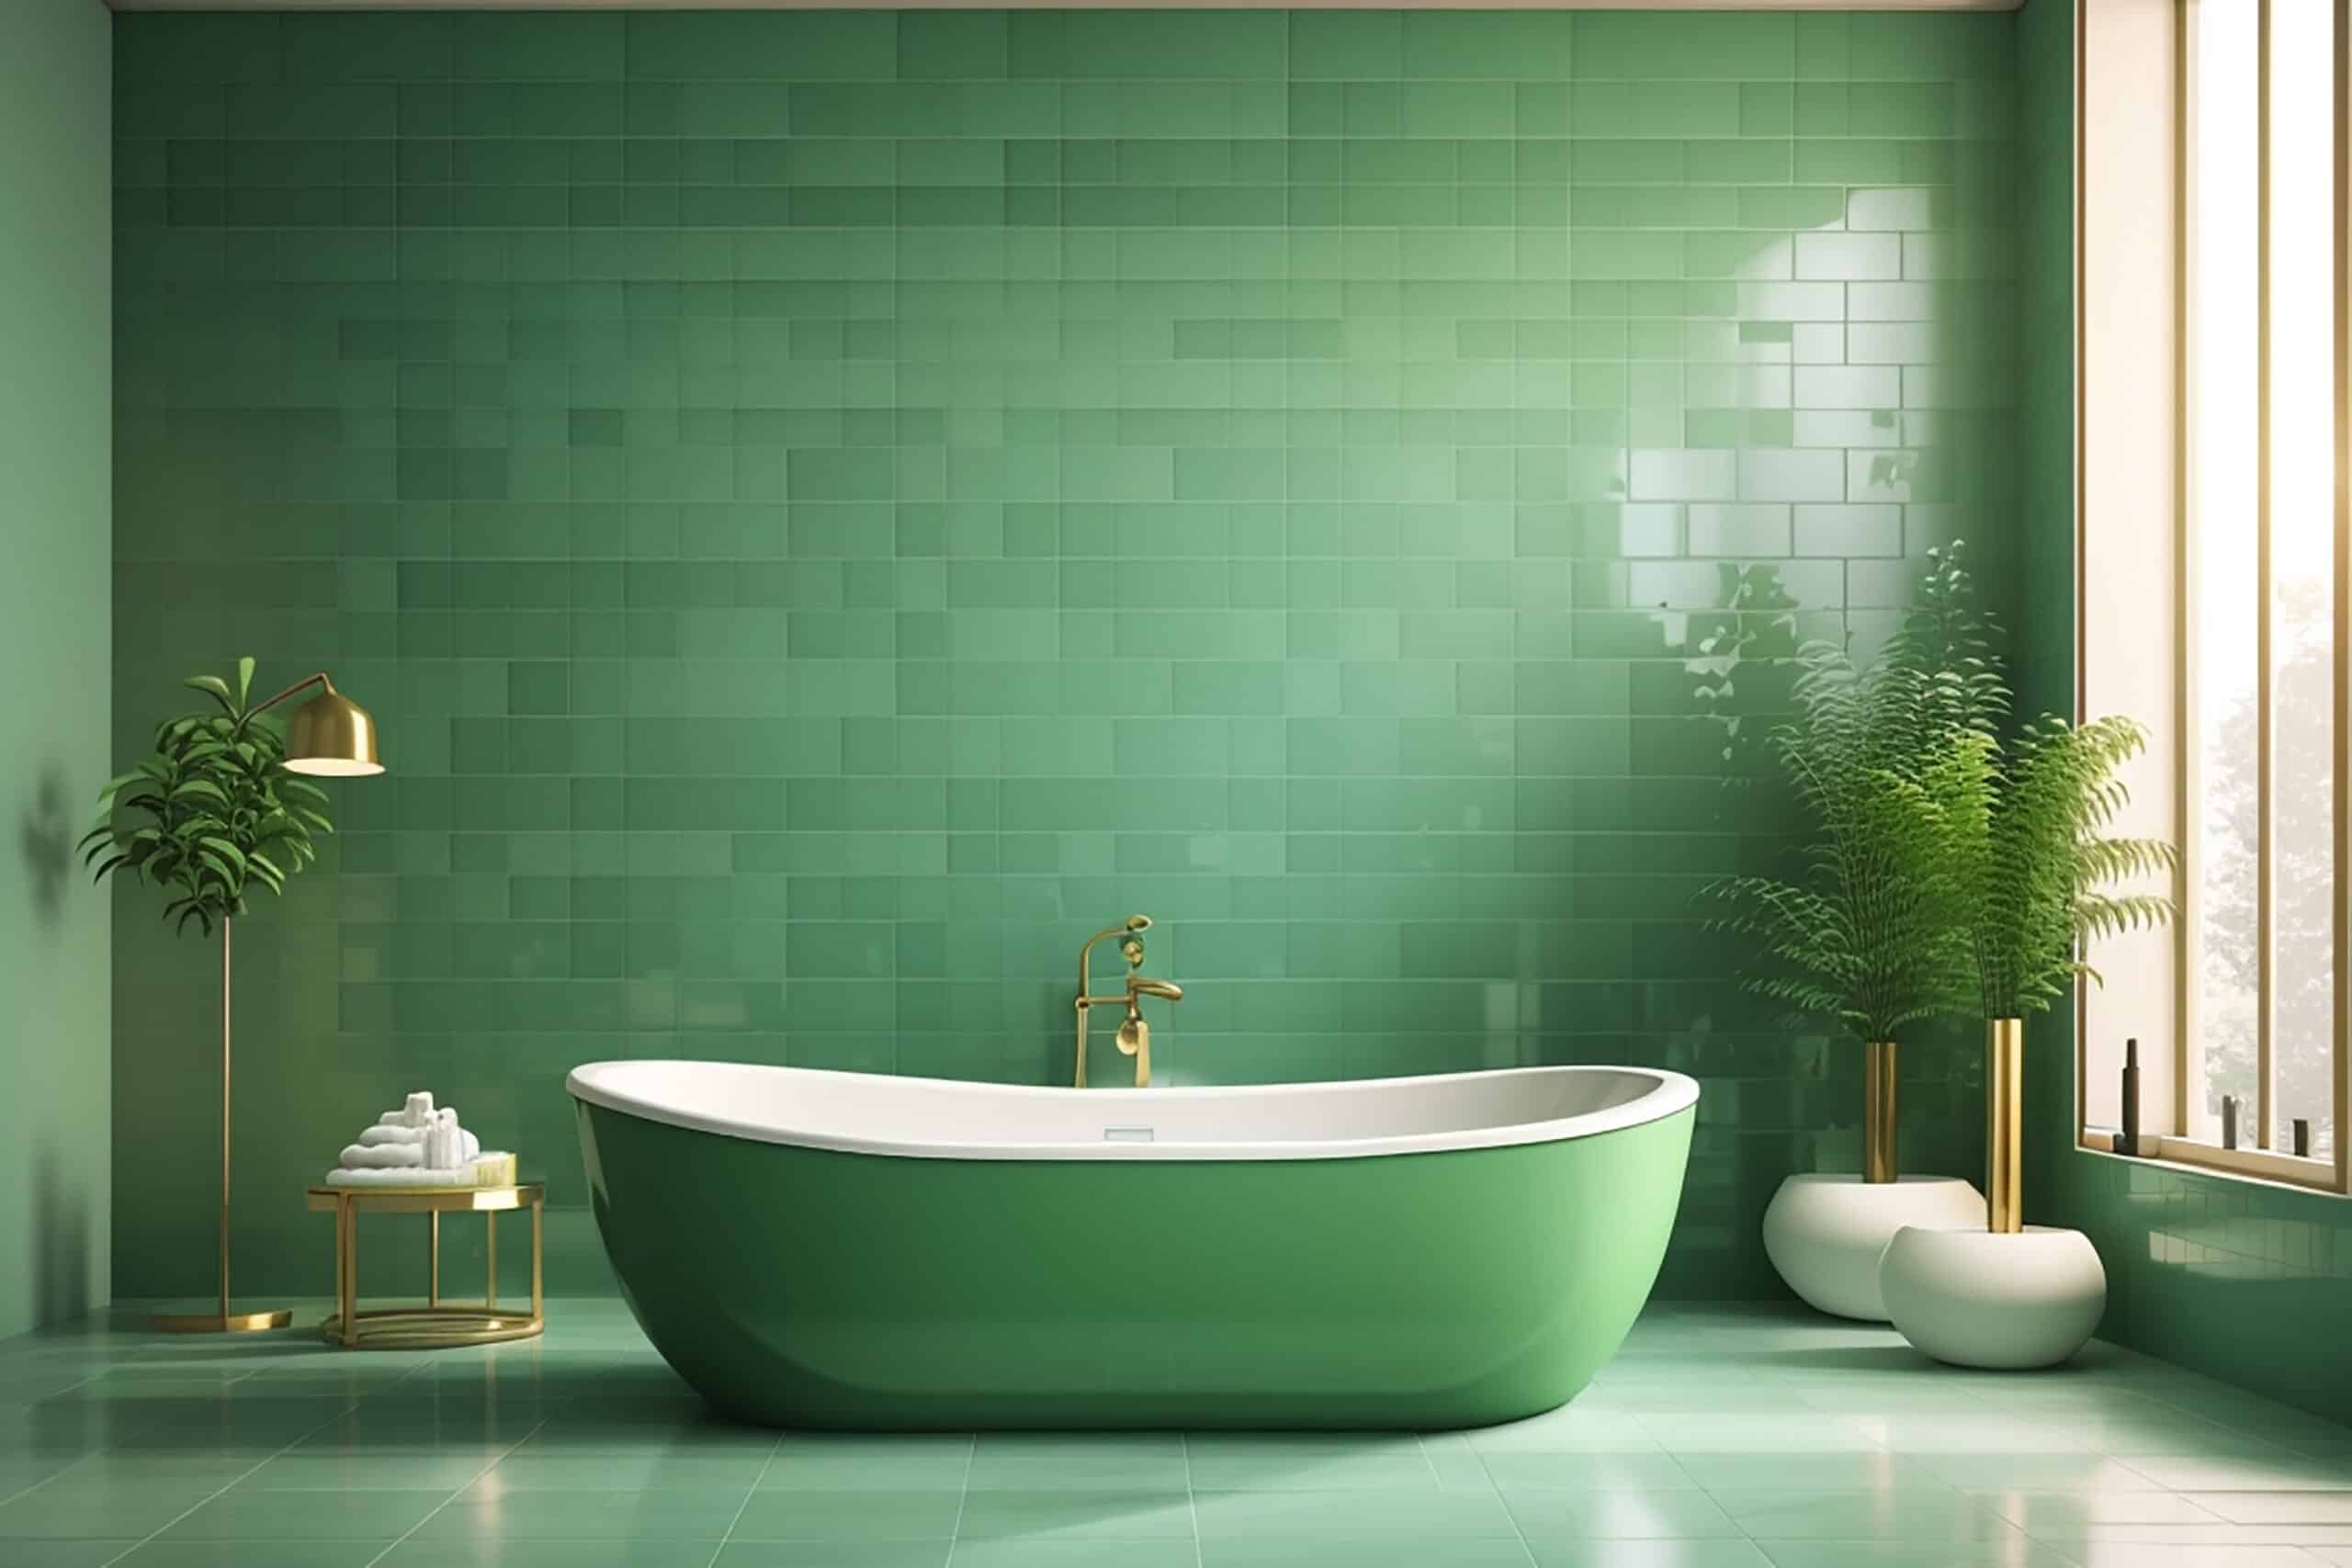 Green bath room interior bathtub with wall white and tiles floor.